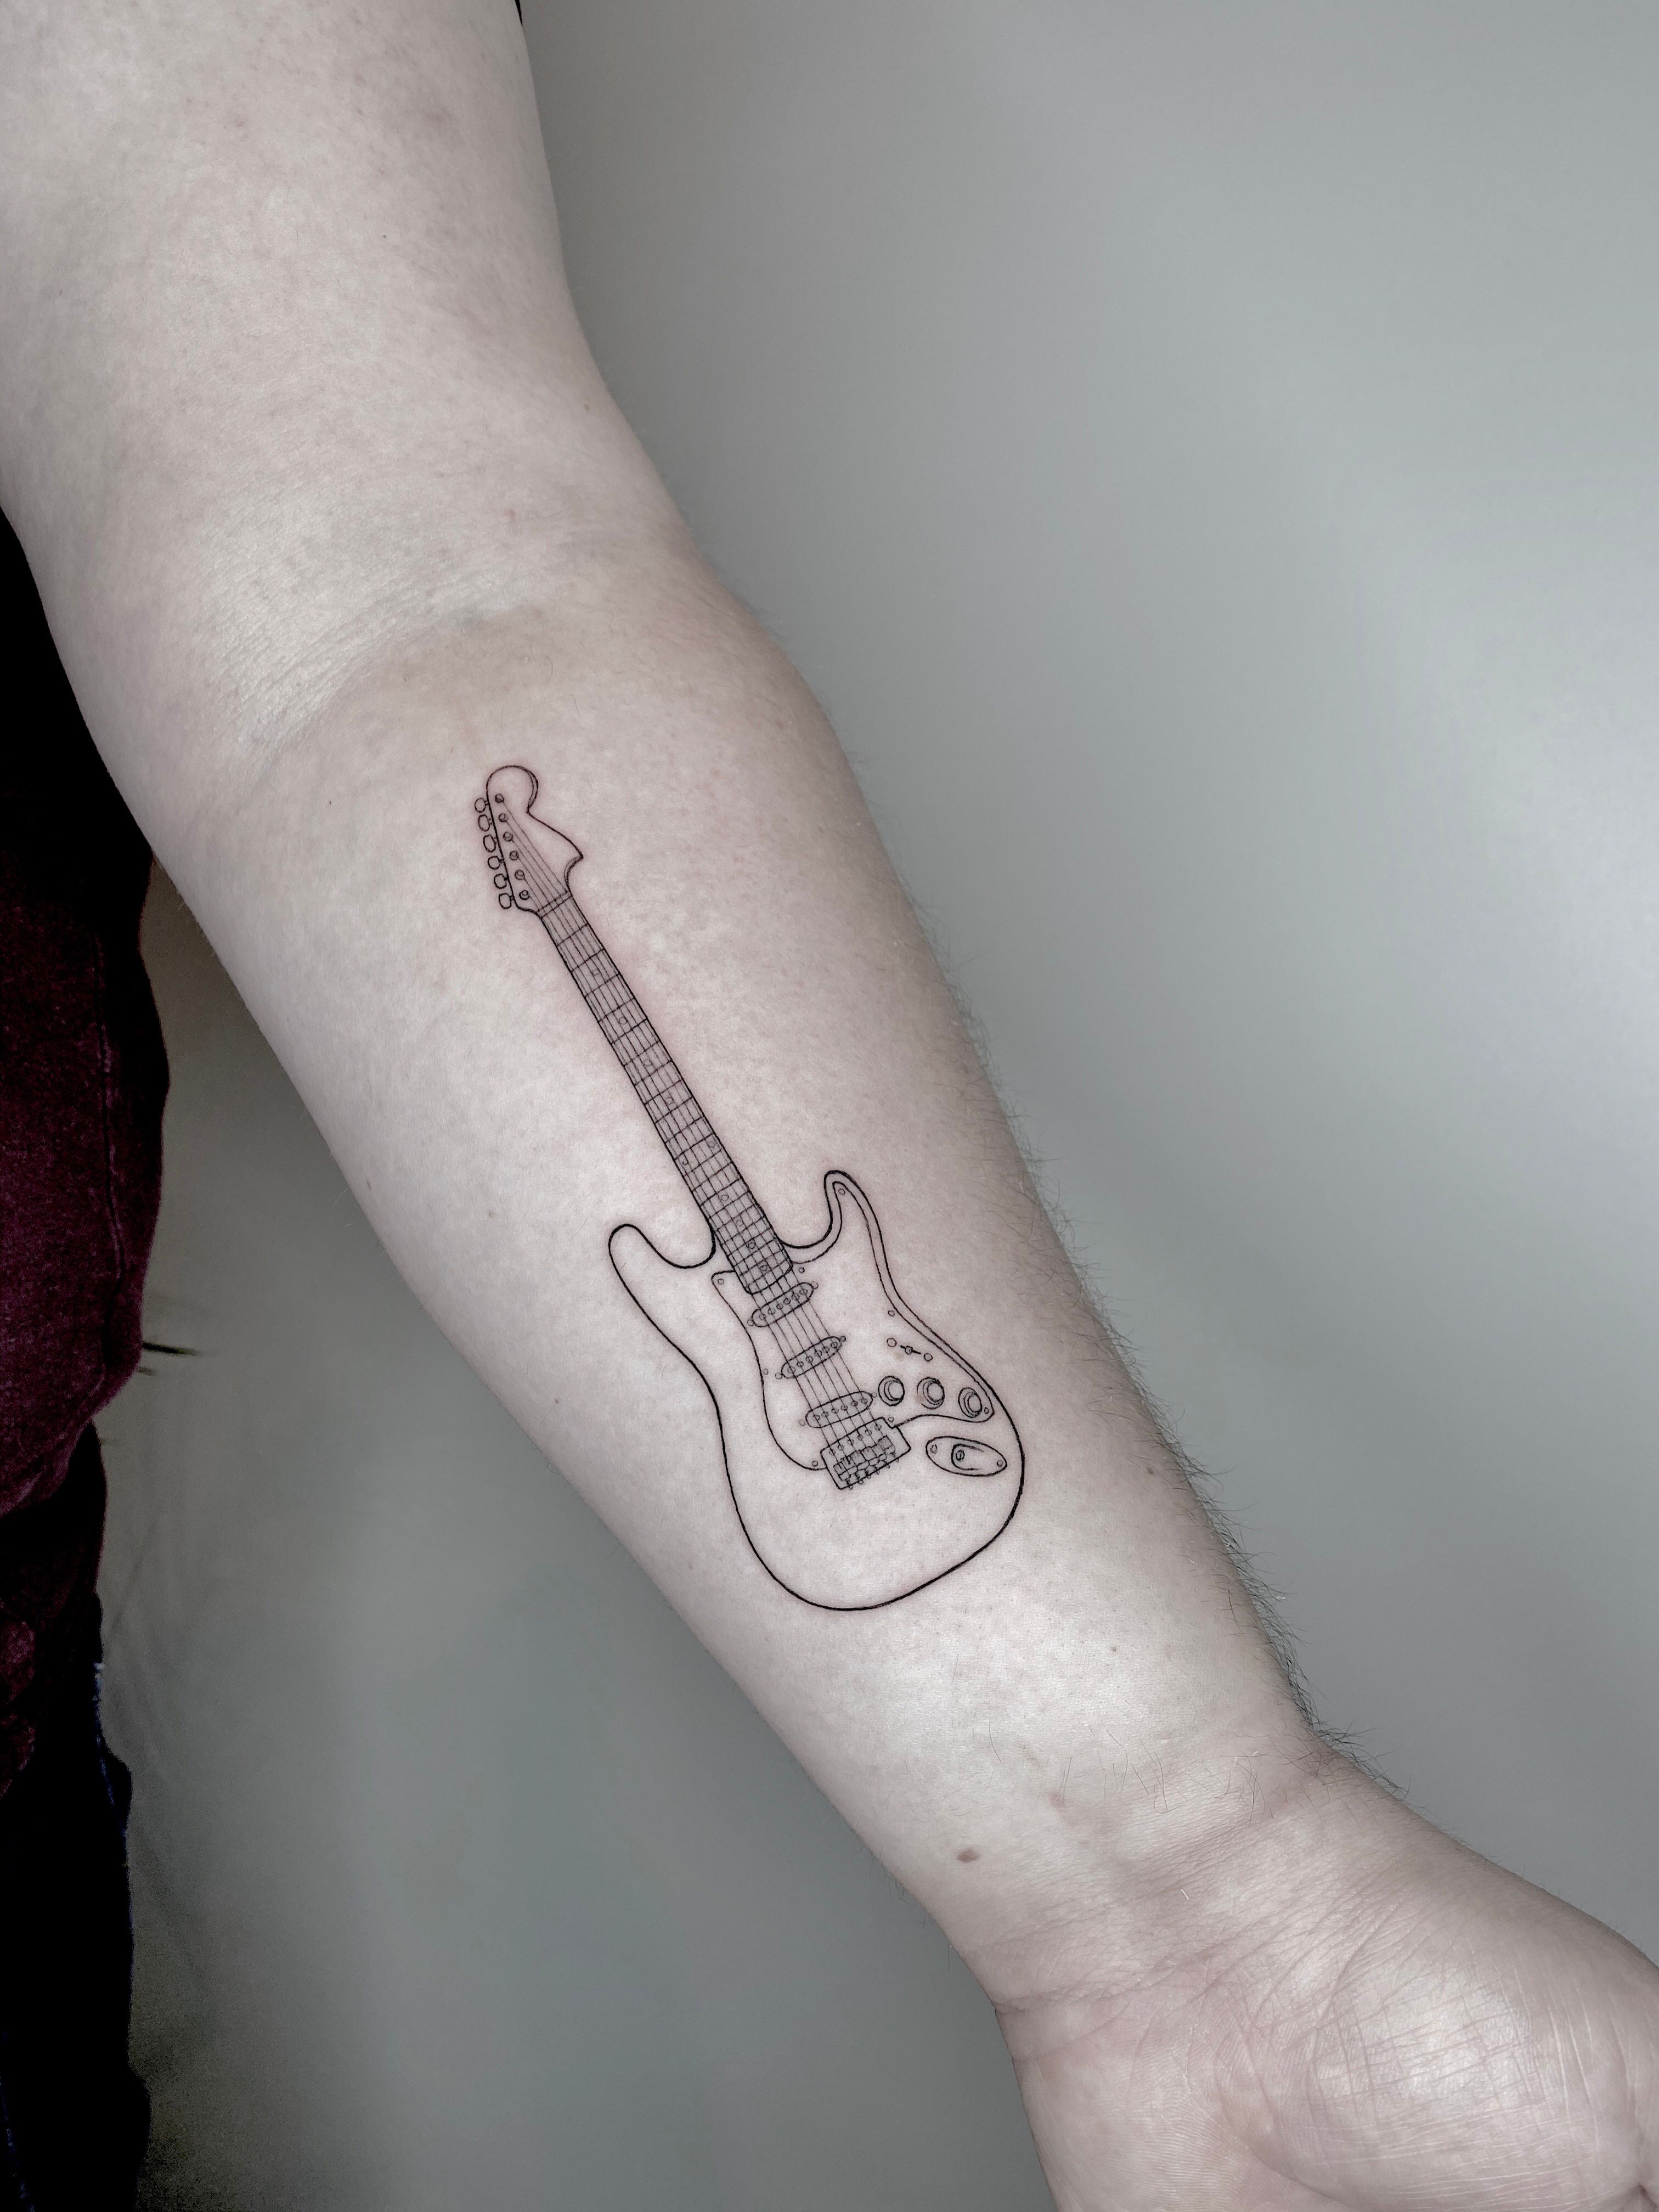 15 Best Guitar Tattoo Designs with Meanings! | Guitar tattoo design, Guitar  tattoo, Tattoo designs and meanings